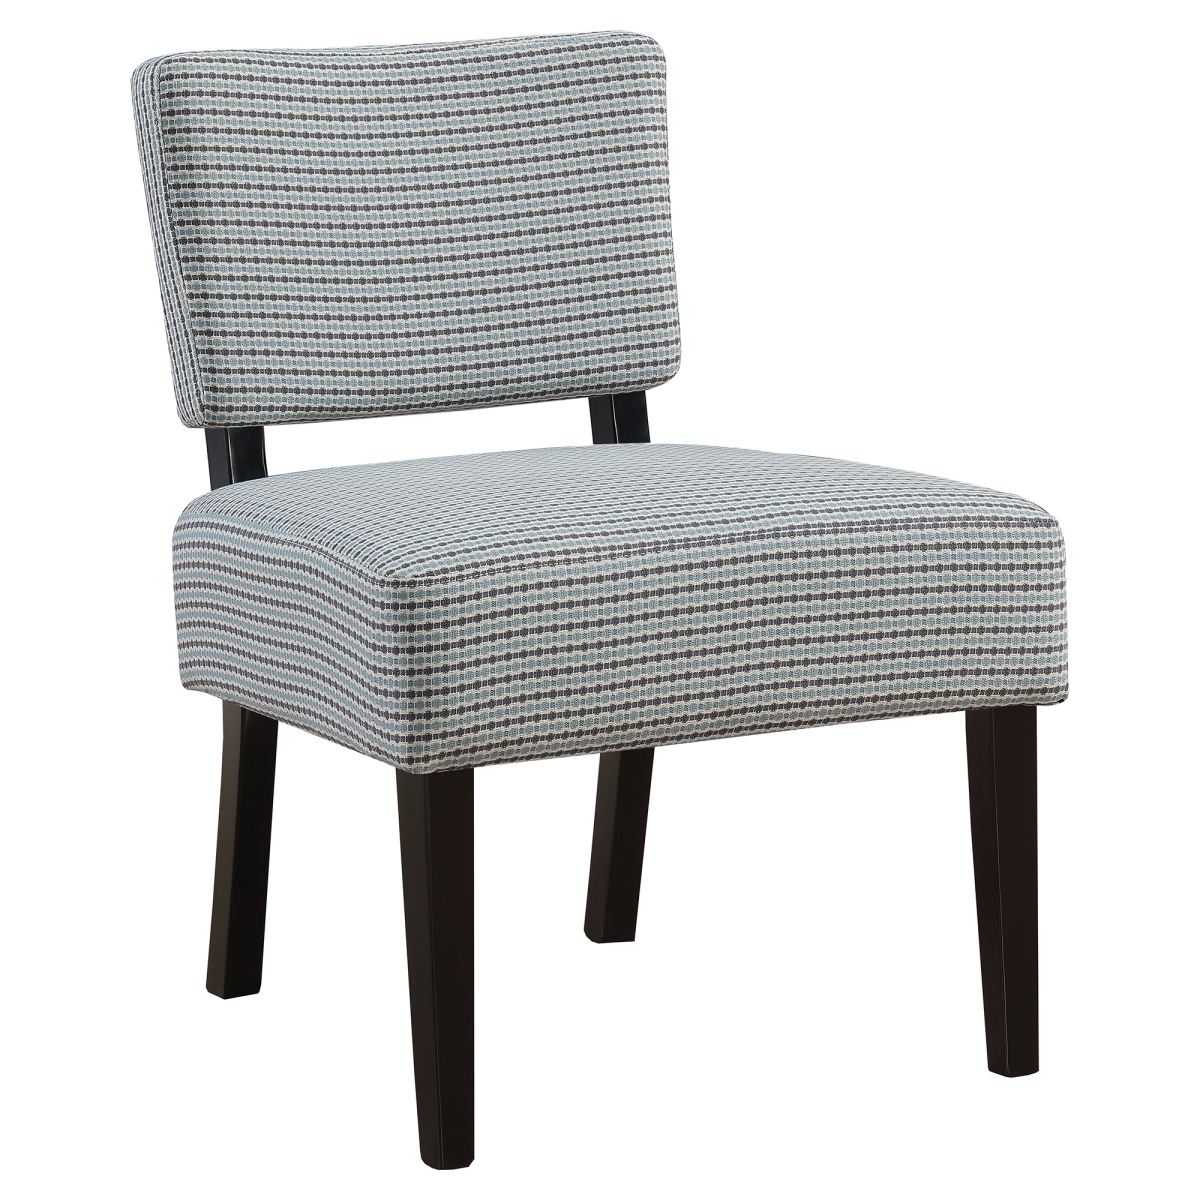 Light Blue & Grey Abstract Dot Fabric Accent Chair